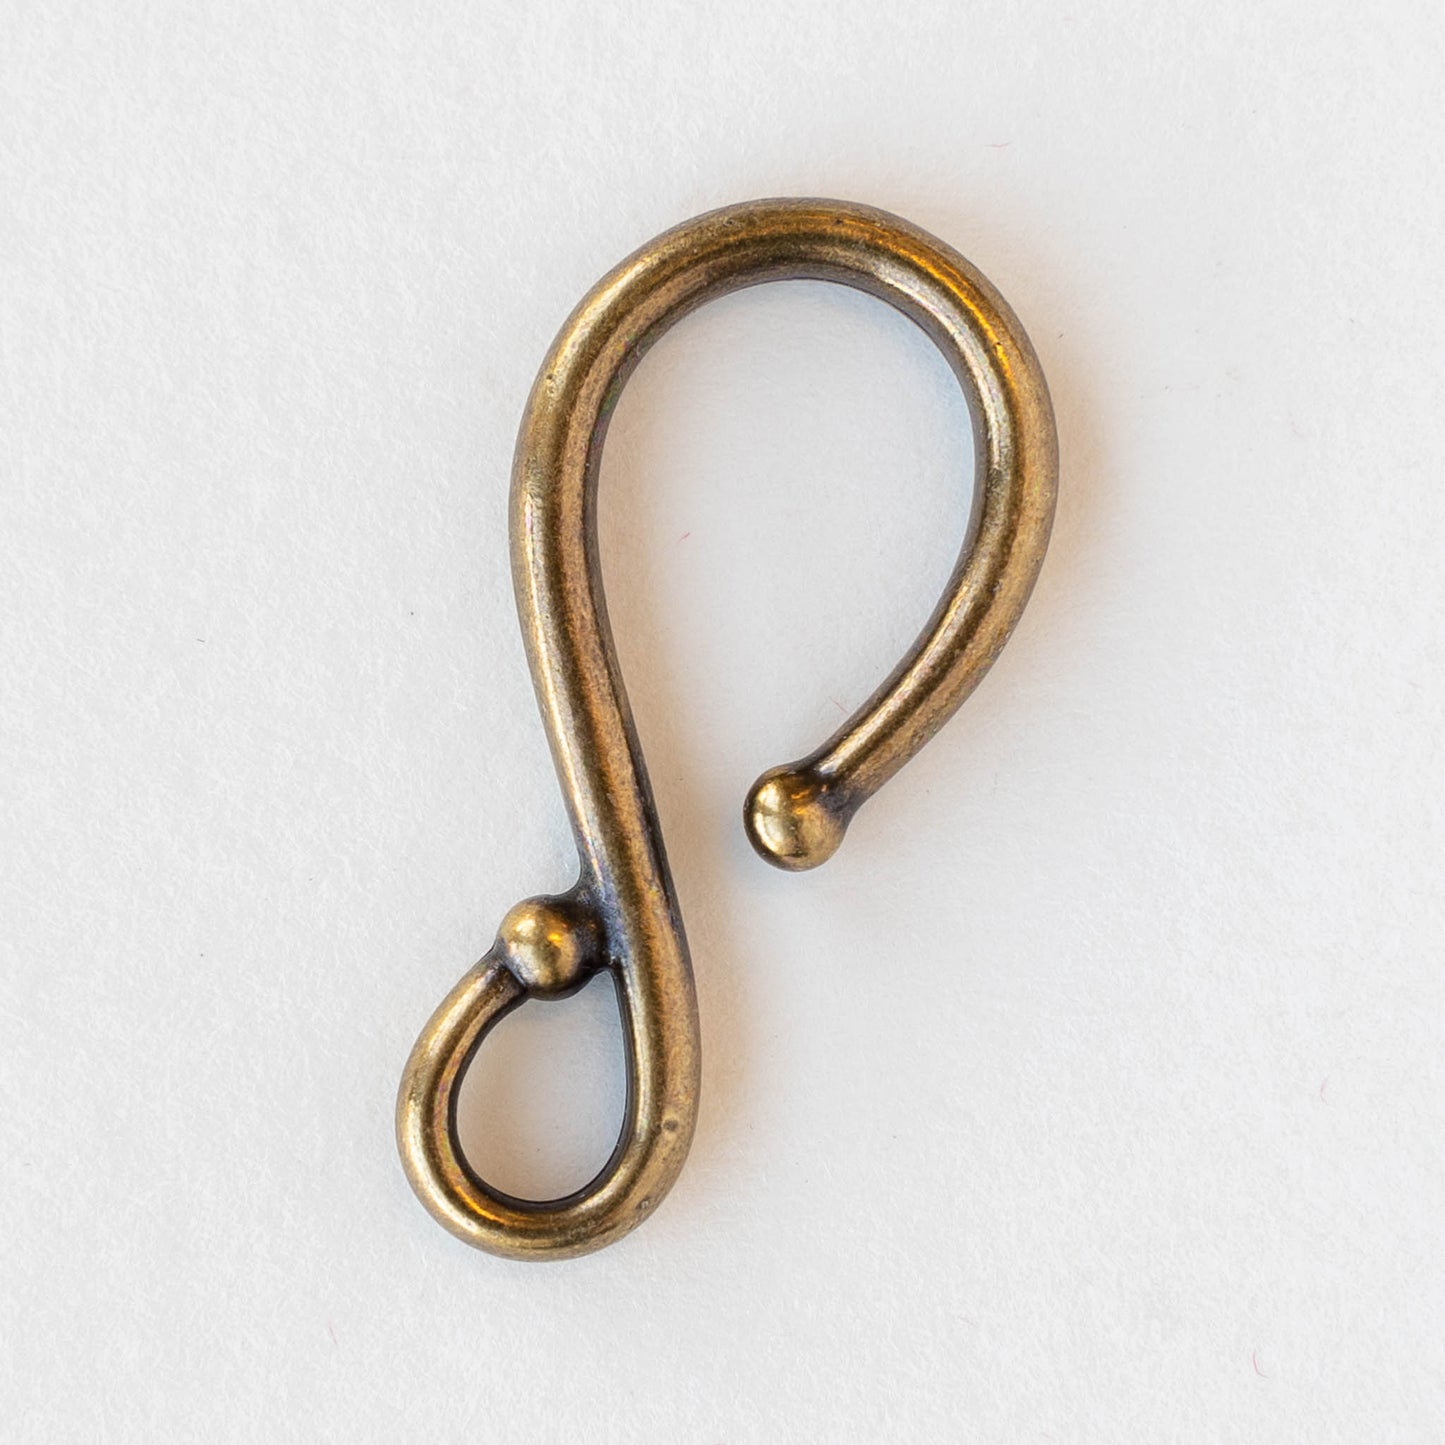 33mm Large Brass Hook Clasp - 1 Clasp